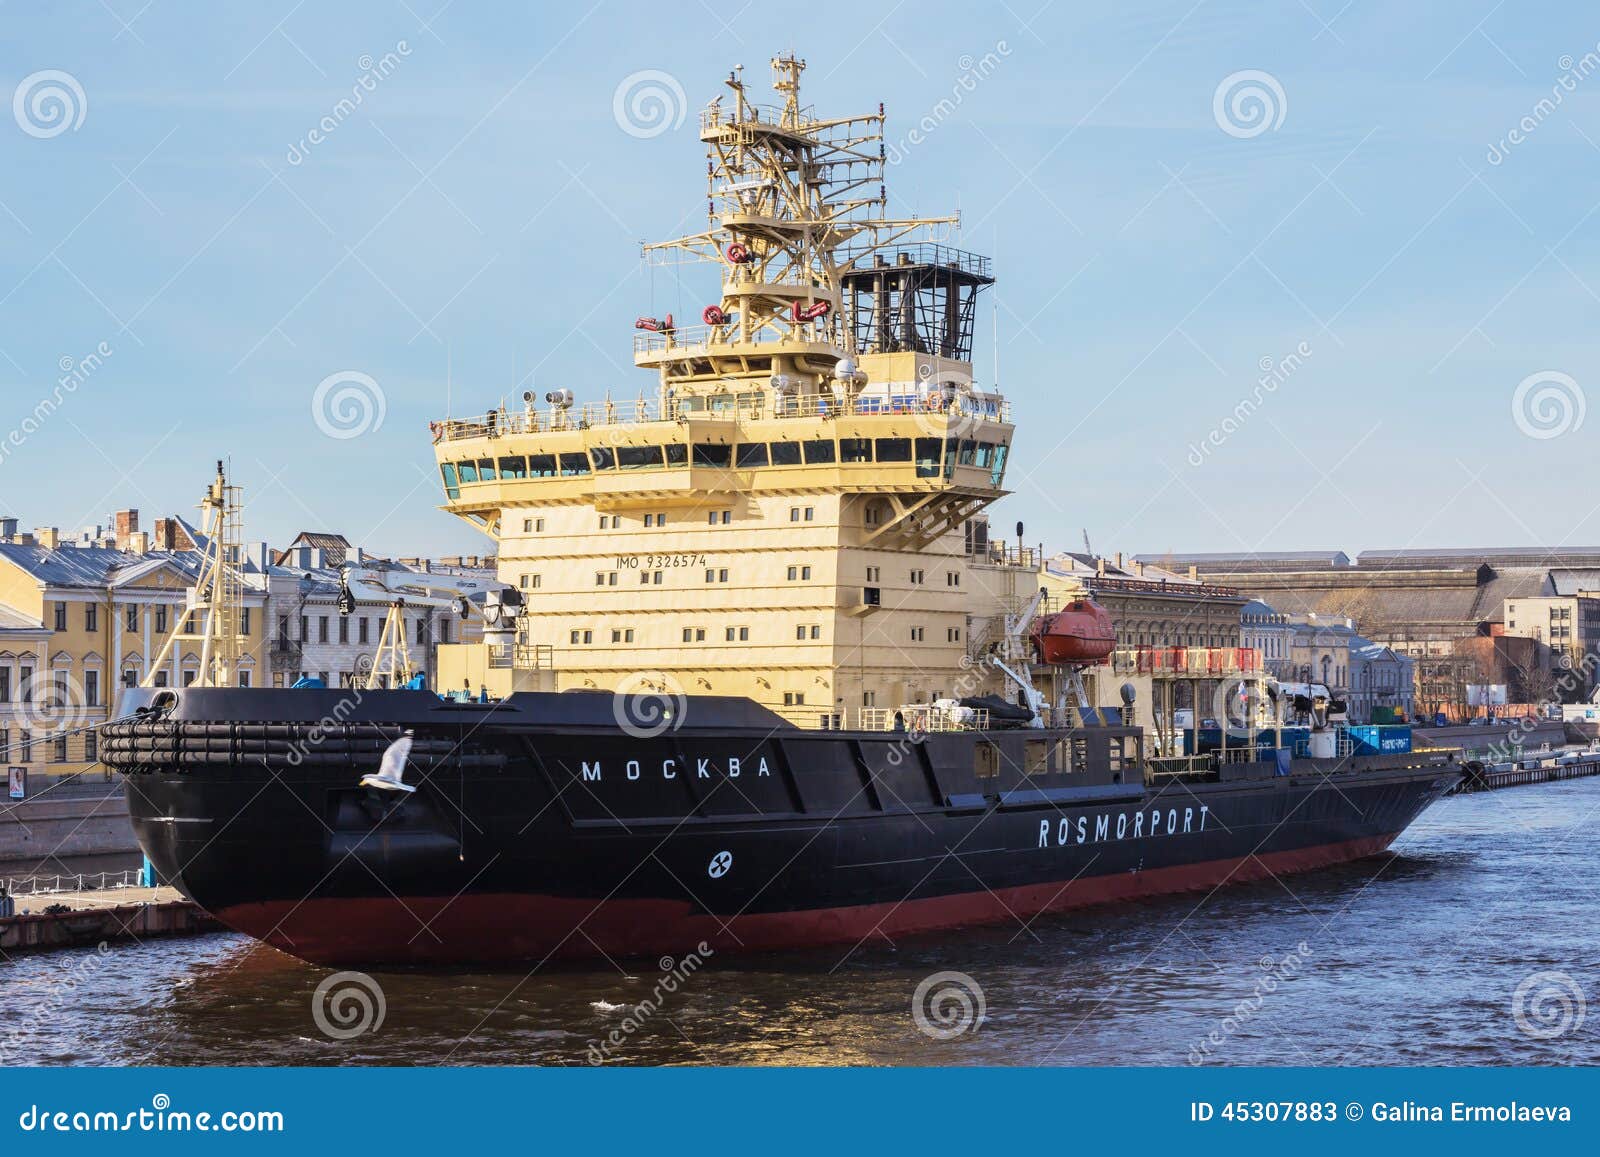 The Diesel-powered Icebreaker Moscow on a Quay at the English